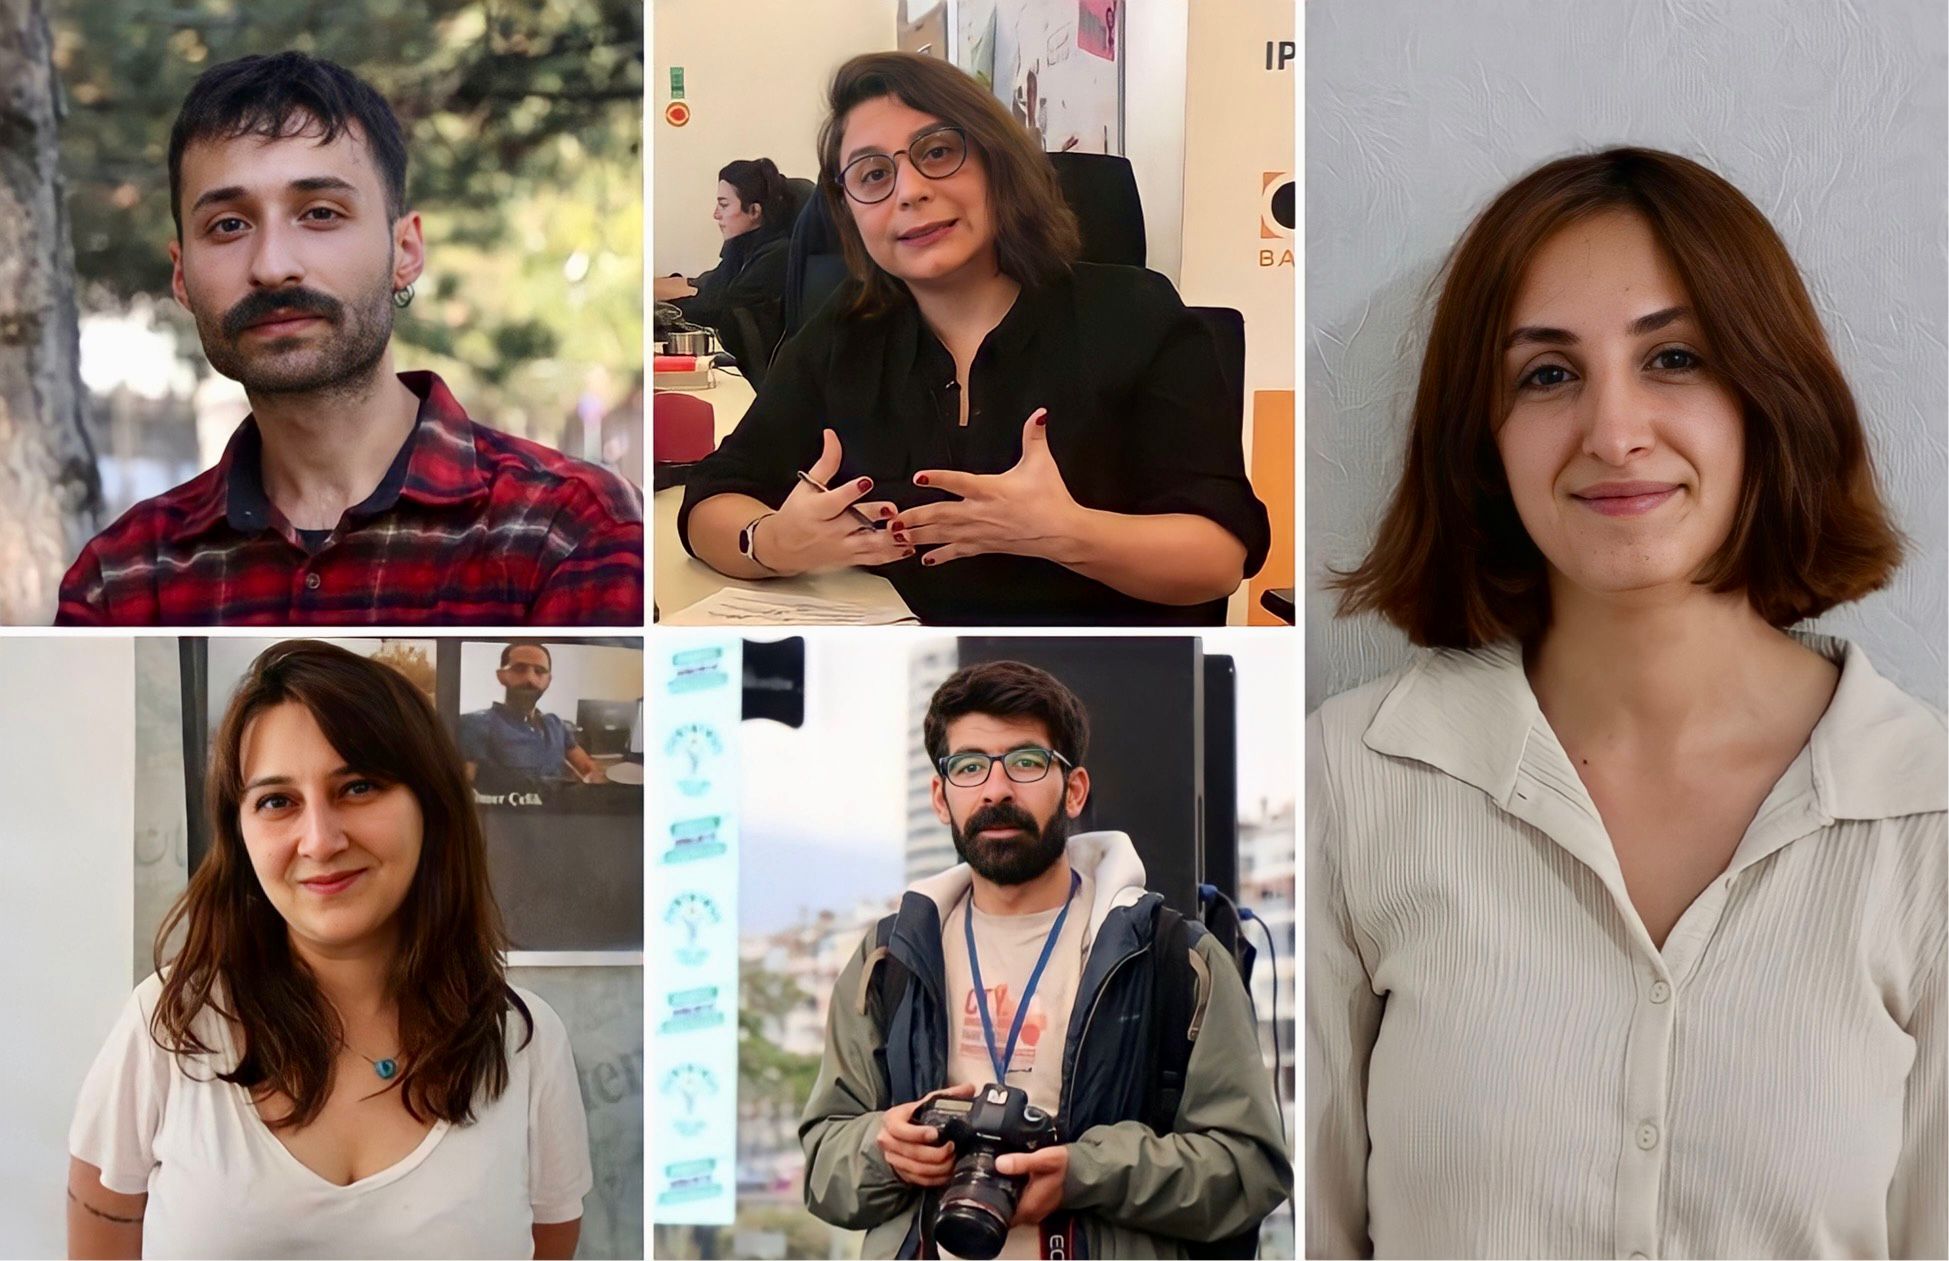 Detention of journalists over report on judicial members draws international condemnation